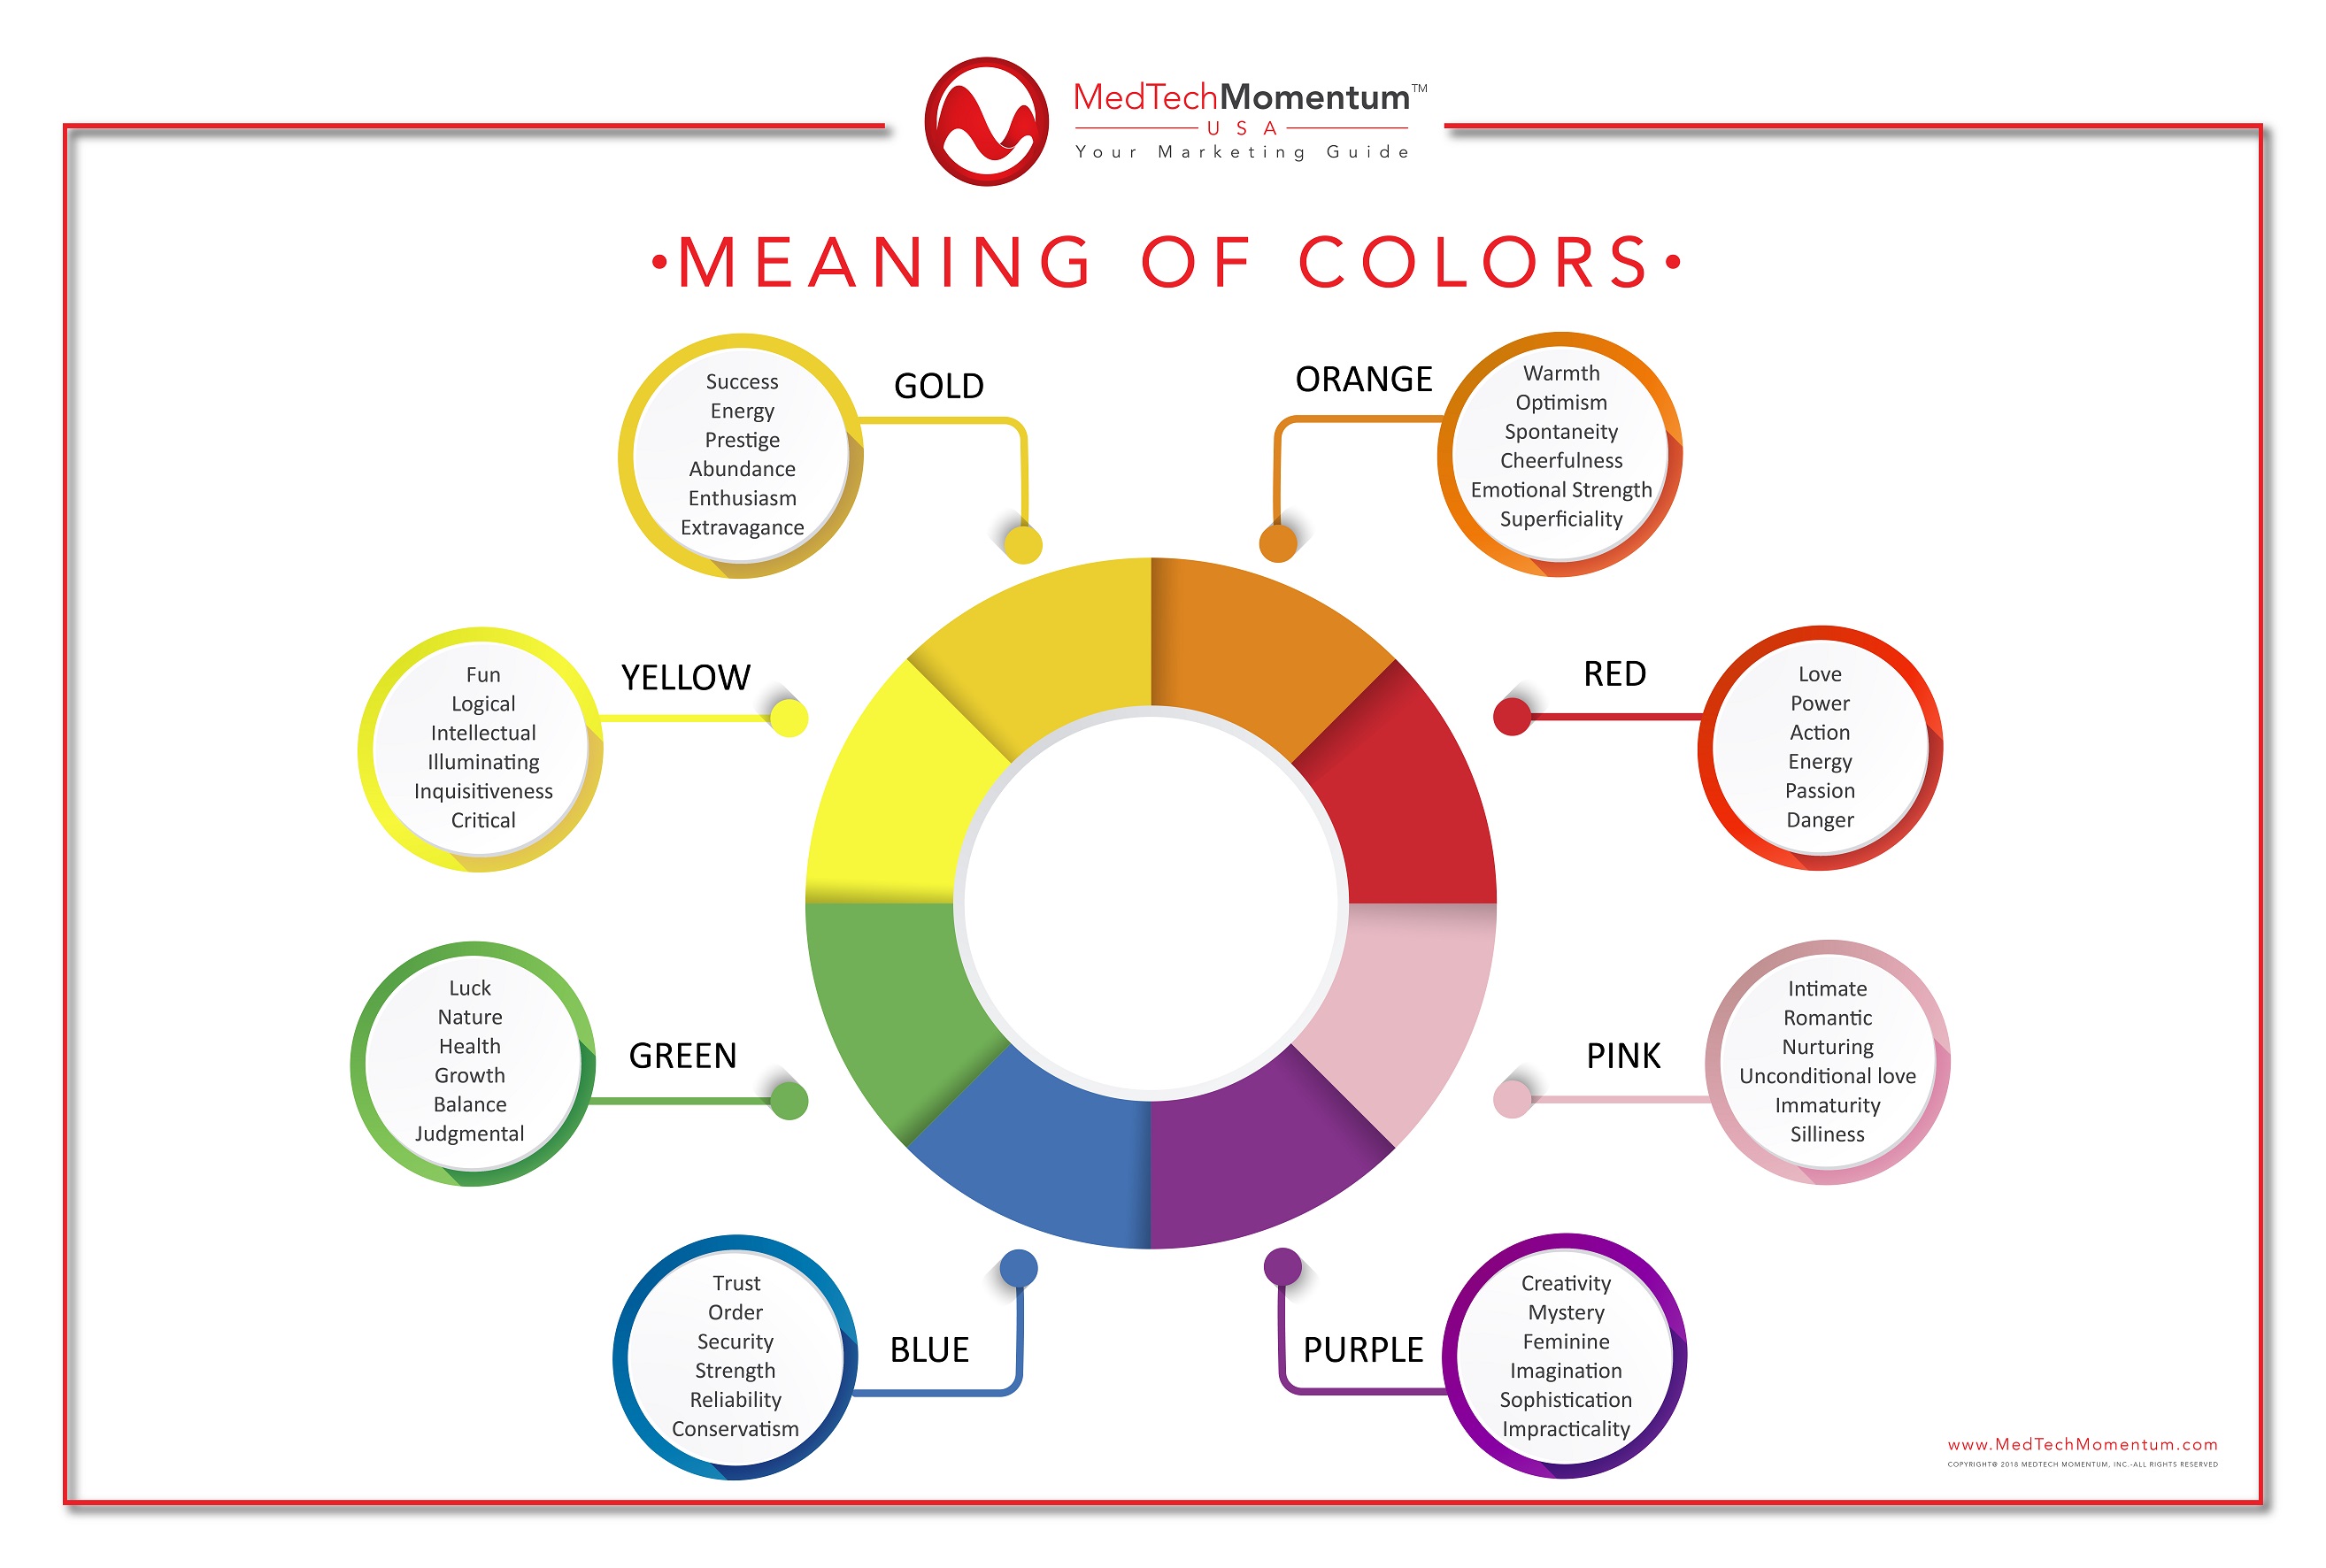 Meaning of Colors